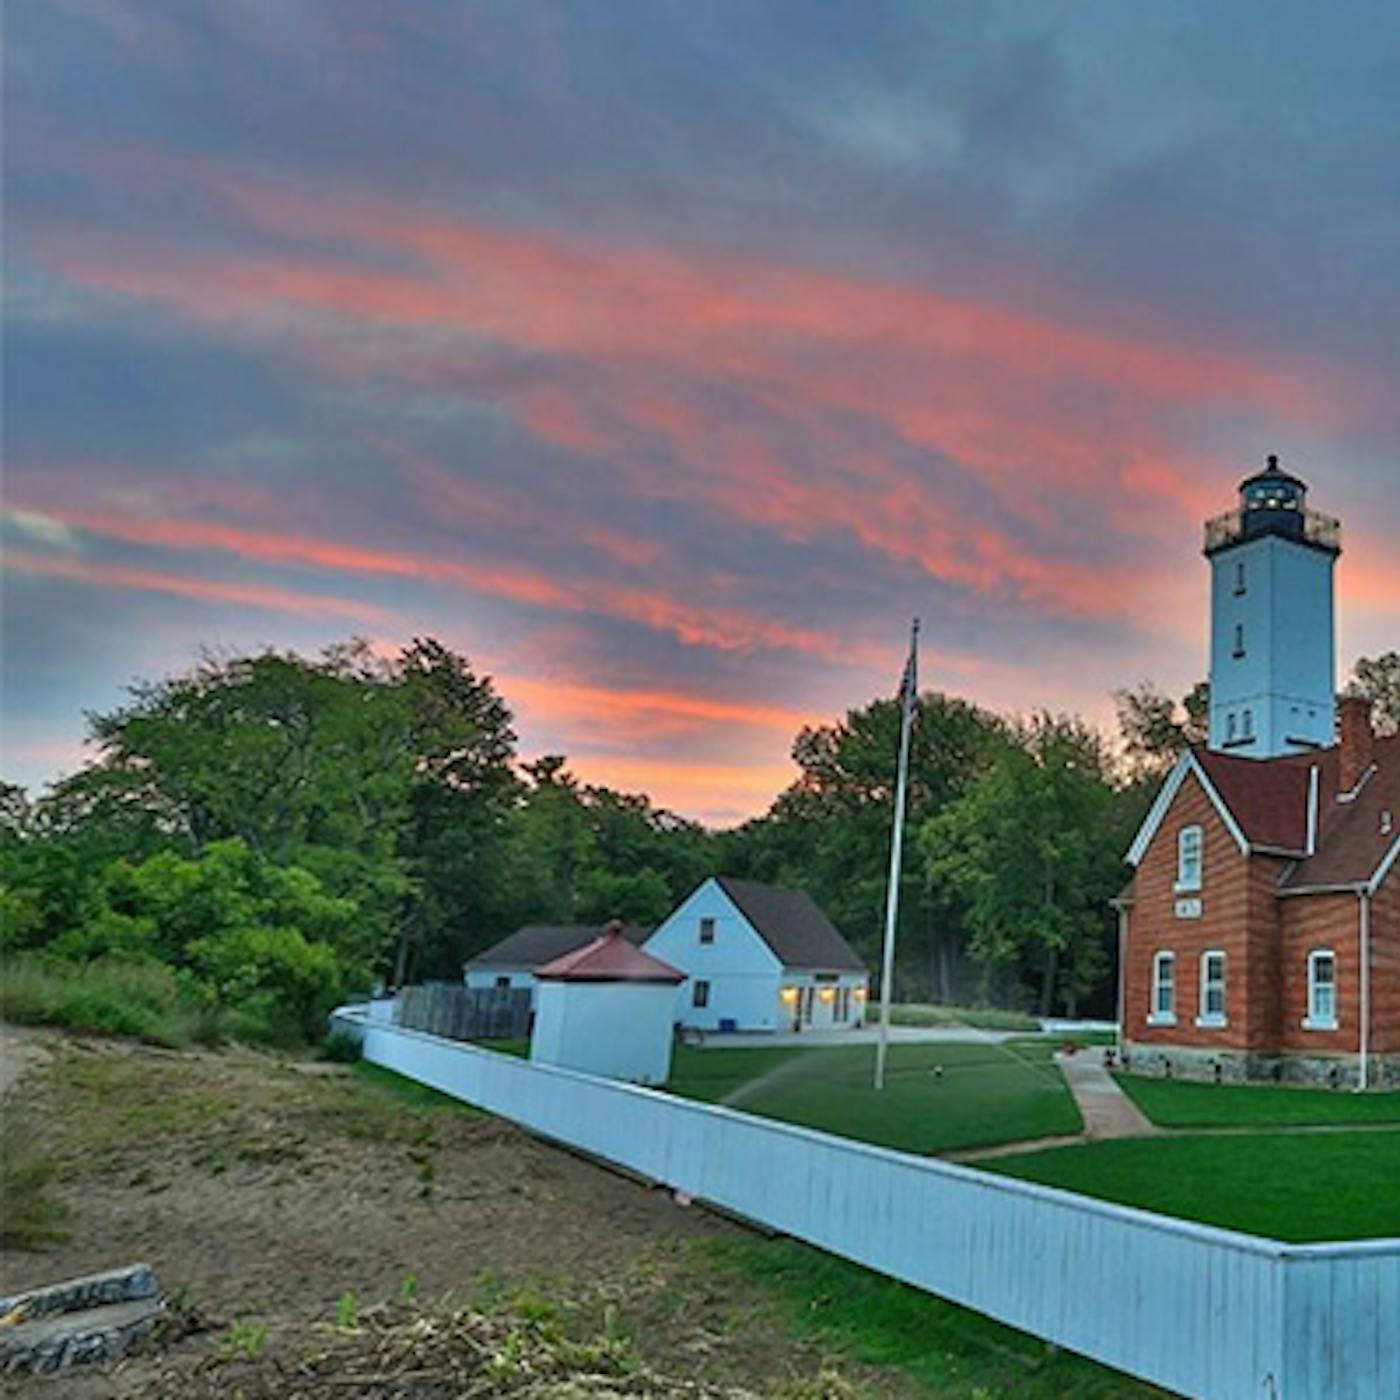 Presque Isle Lighthouse in Erie, Pennsylvania (photo by Brian Berchtold))